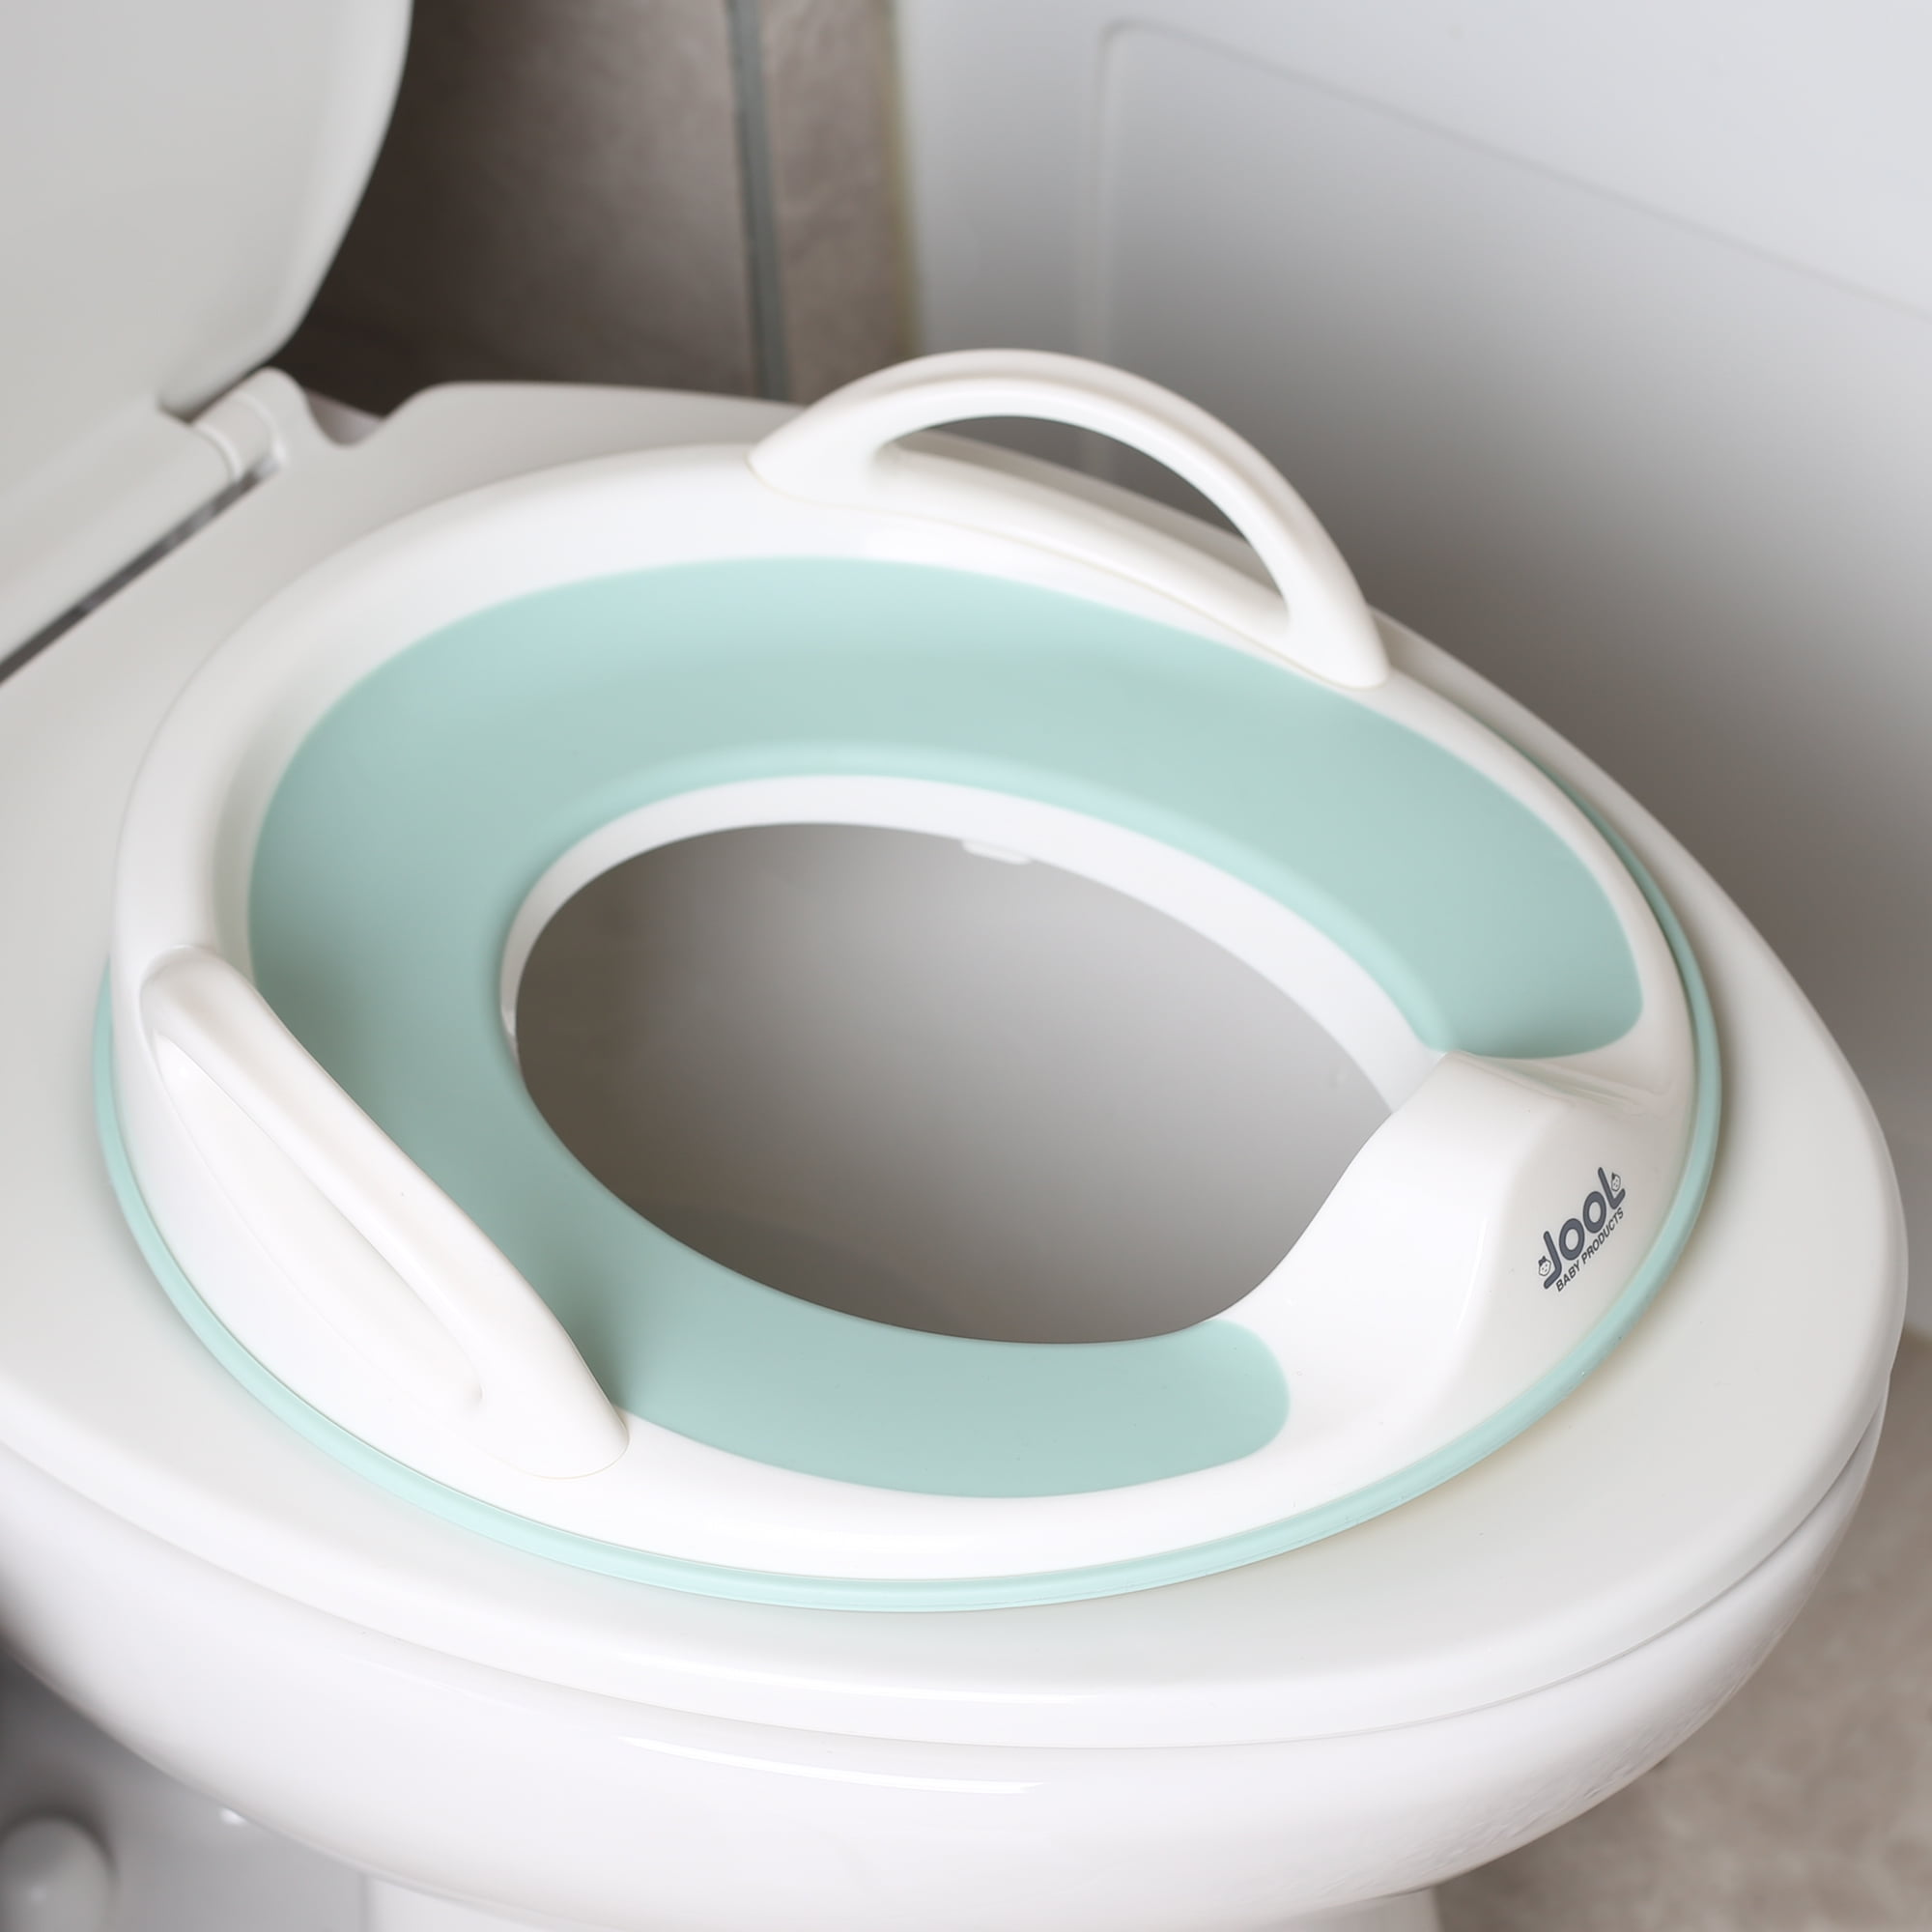 Munchkin baby Toddler Potty Toilet Seat Step Mutltistage 3 In 1 Toilet Training 